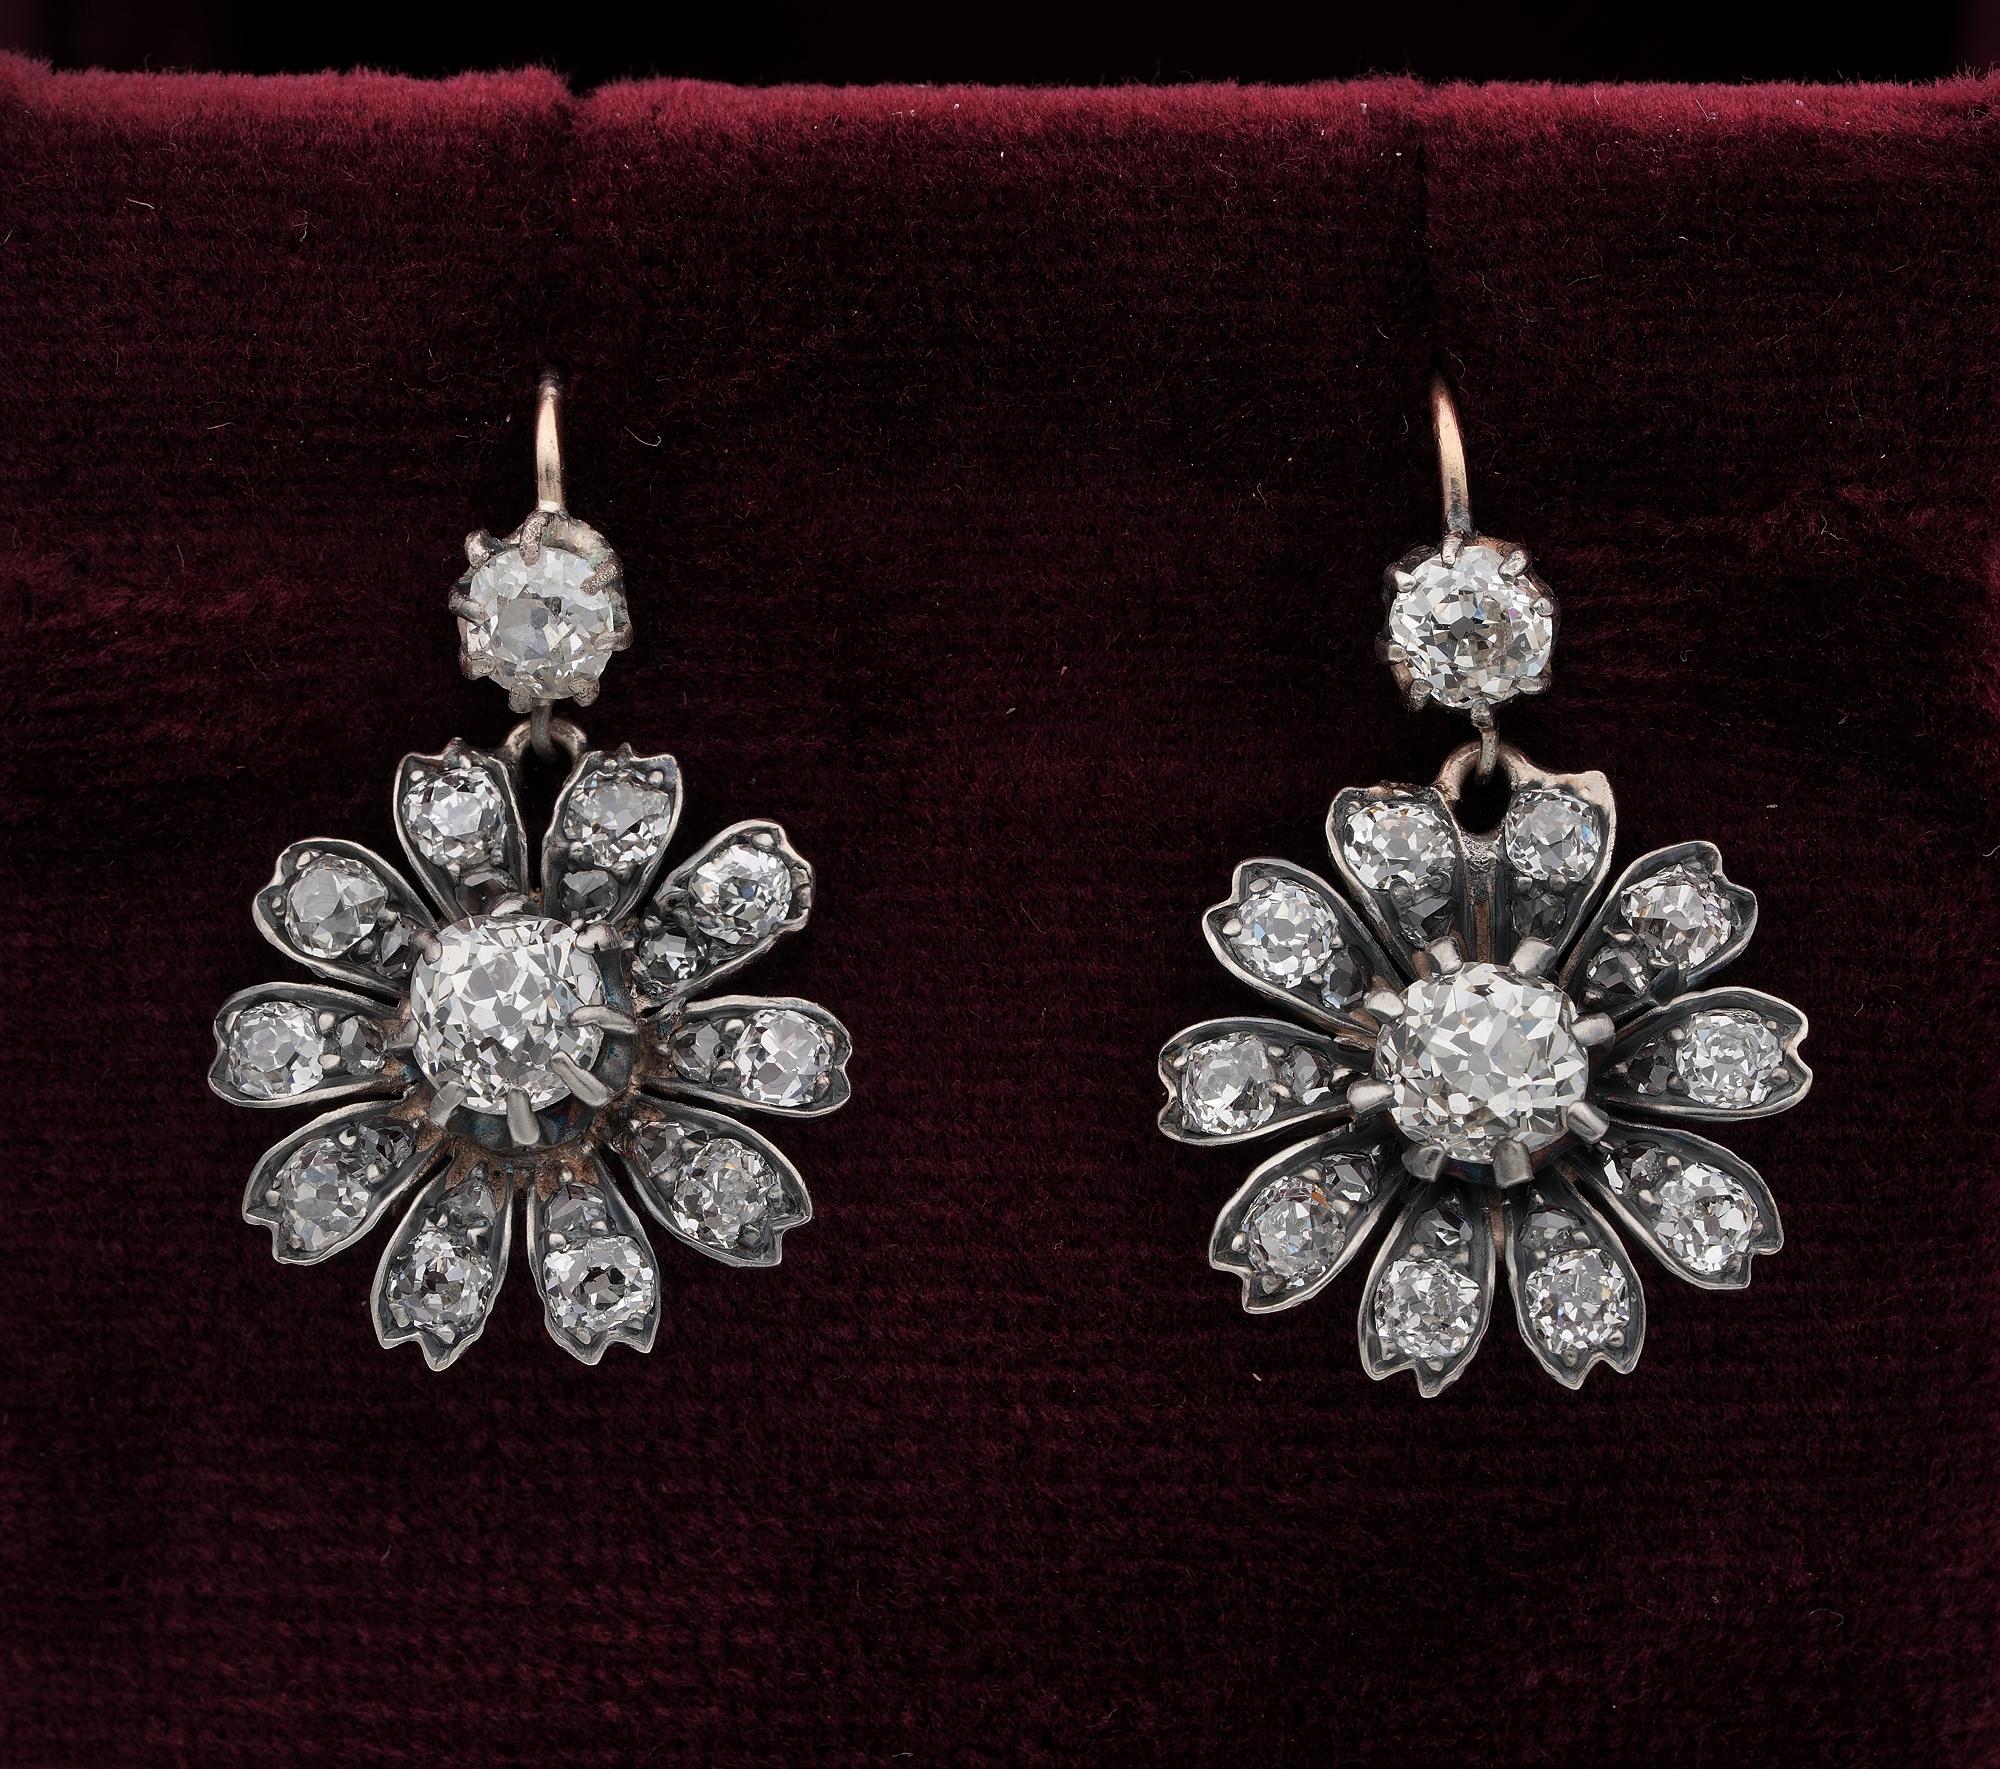 Sweet Daisy

Rare, radiant, prettiest in design original Victorian Diamond drop earrings 1860 ca
Romantic, Daisy flower beautifully shaped to drop perfectly from ears projecting sparkle and glistening white fire throughout
Set with 3.0 Ct of old